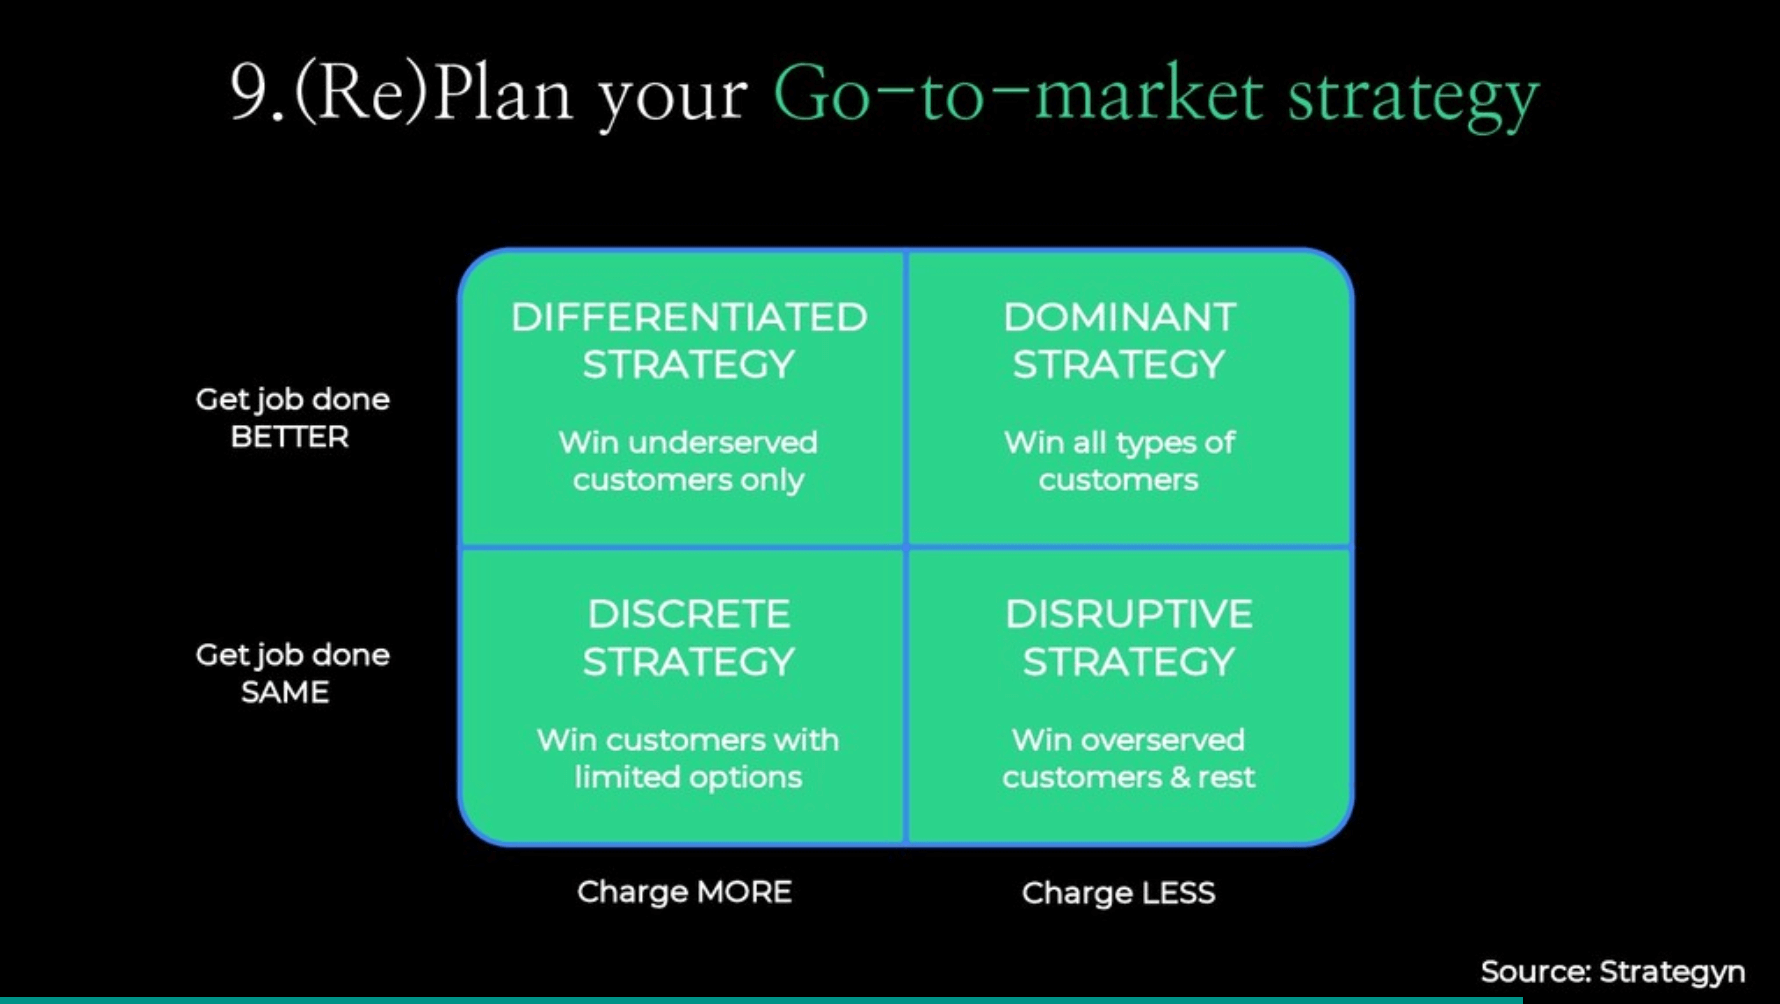 (Re)plan your go-to-market strategy.